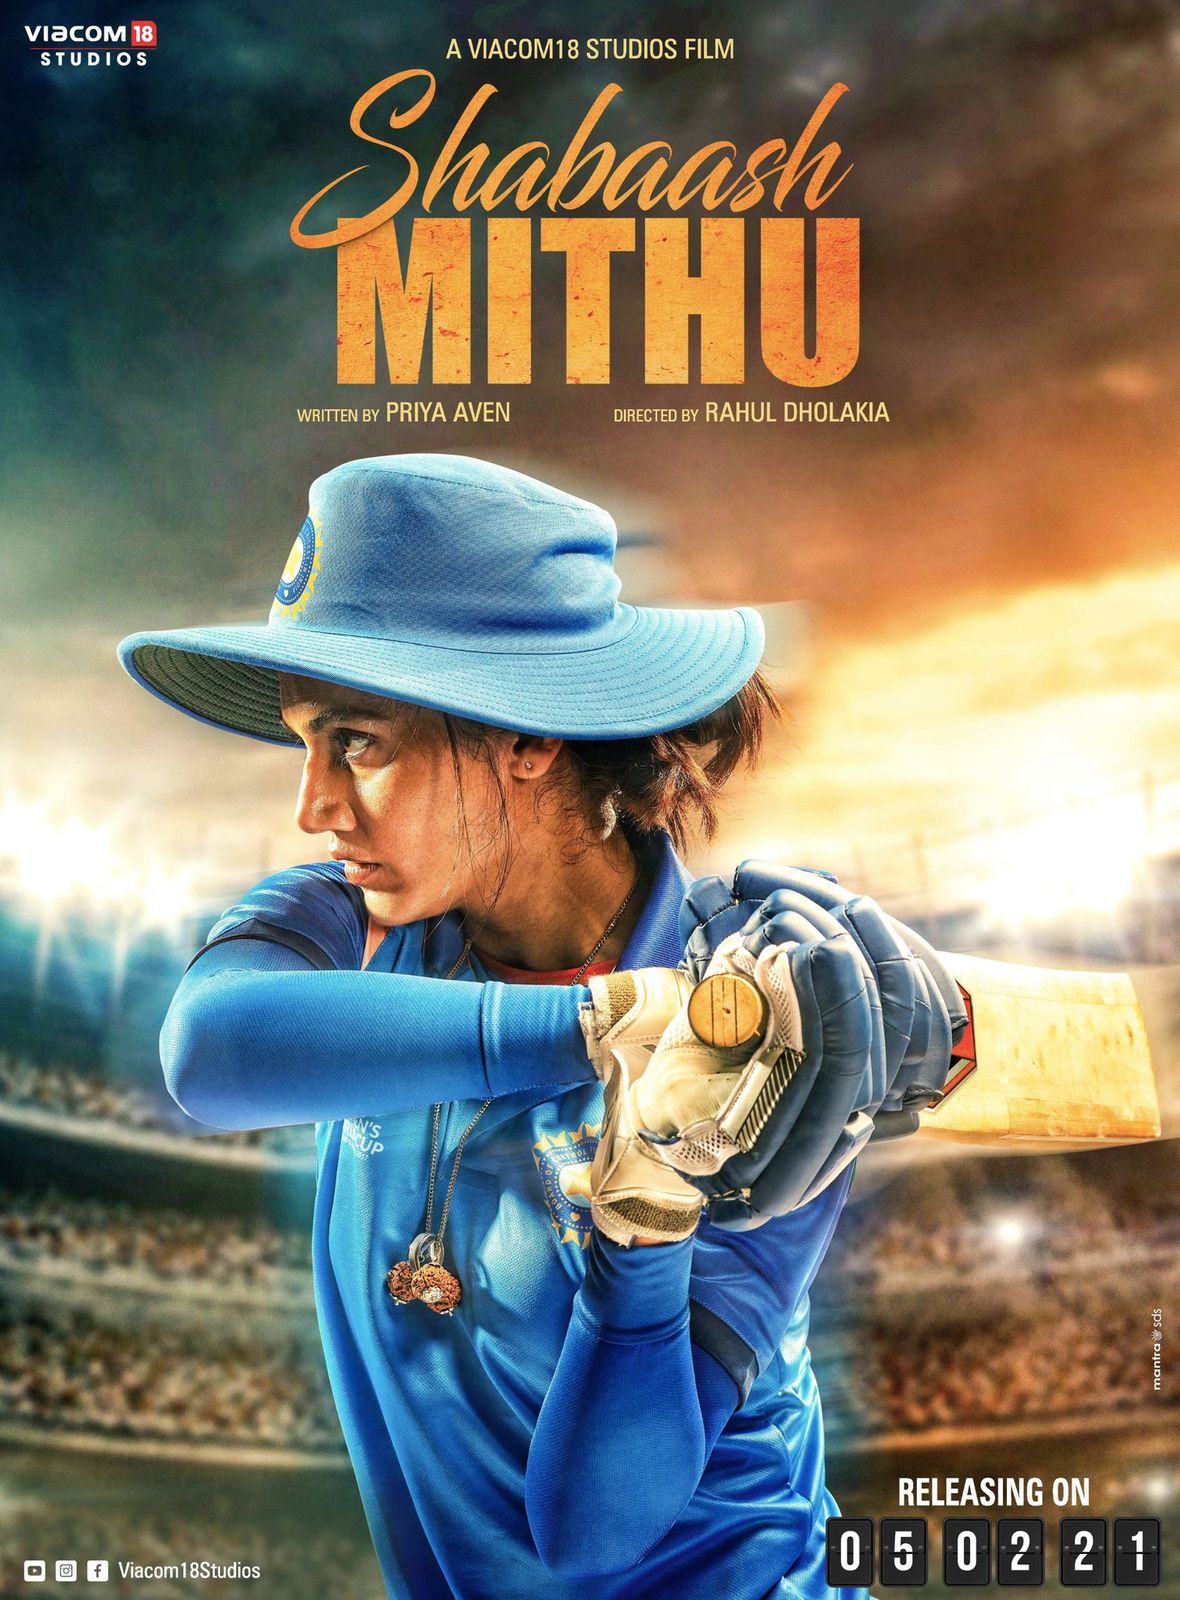 Shabaash Mithu: Taapsee Pannu's Film On Mithali Raj To Be Shot In England, Producer Says Location Hunting Is A Challenge